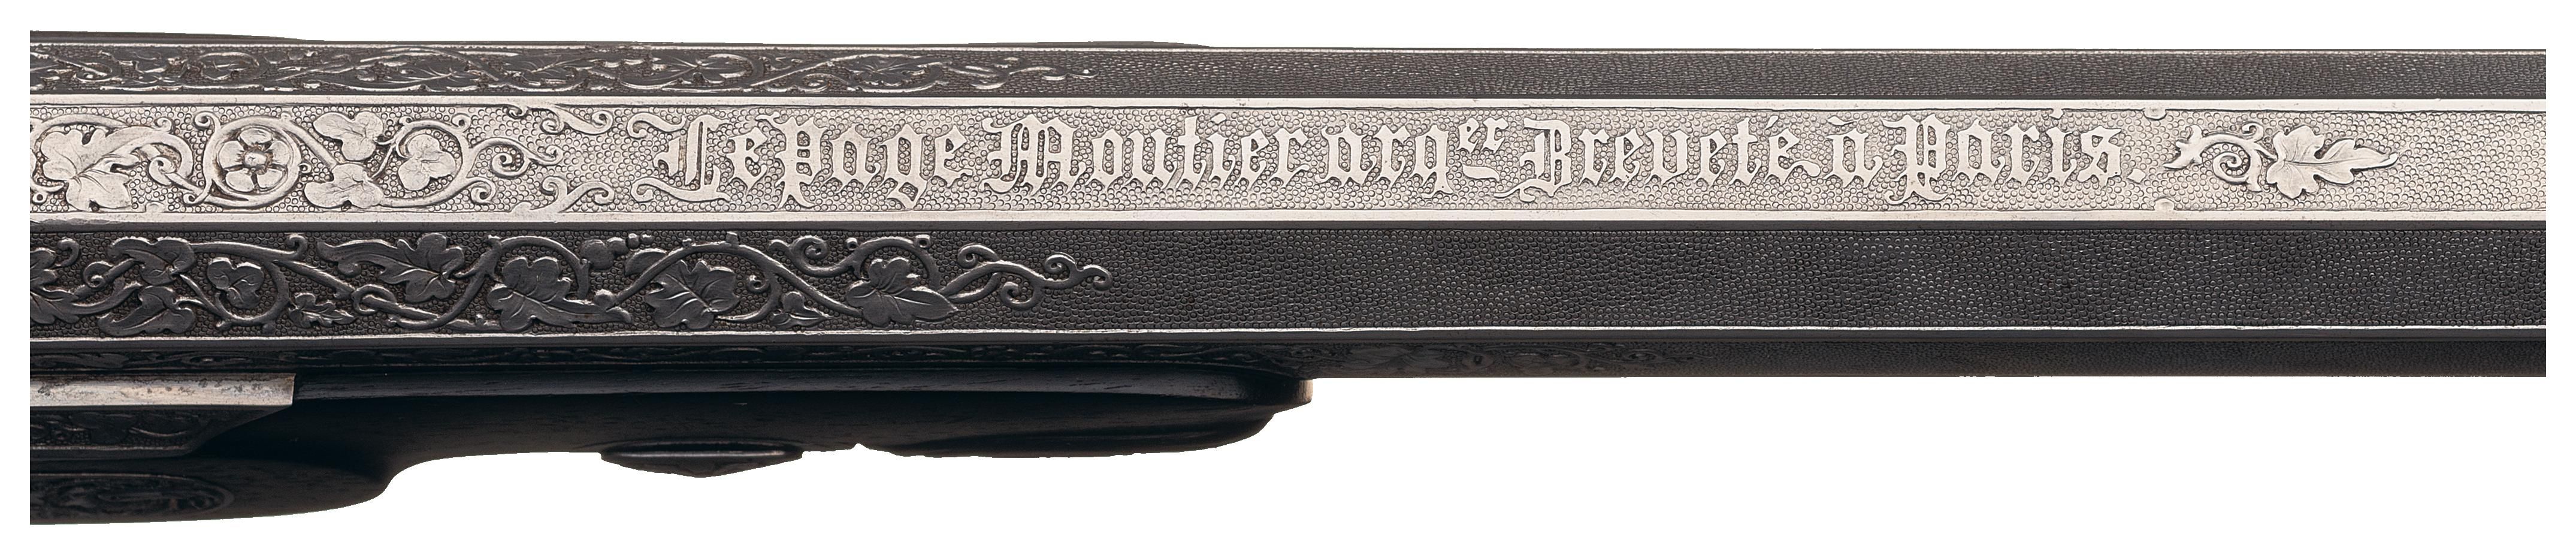 Signed by Gilles Michel Louis Moutier-Le Page, Percussion Exhibition Pistol, French